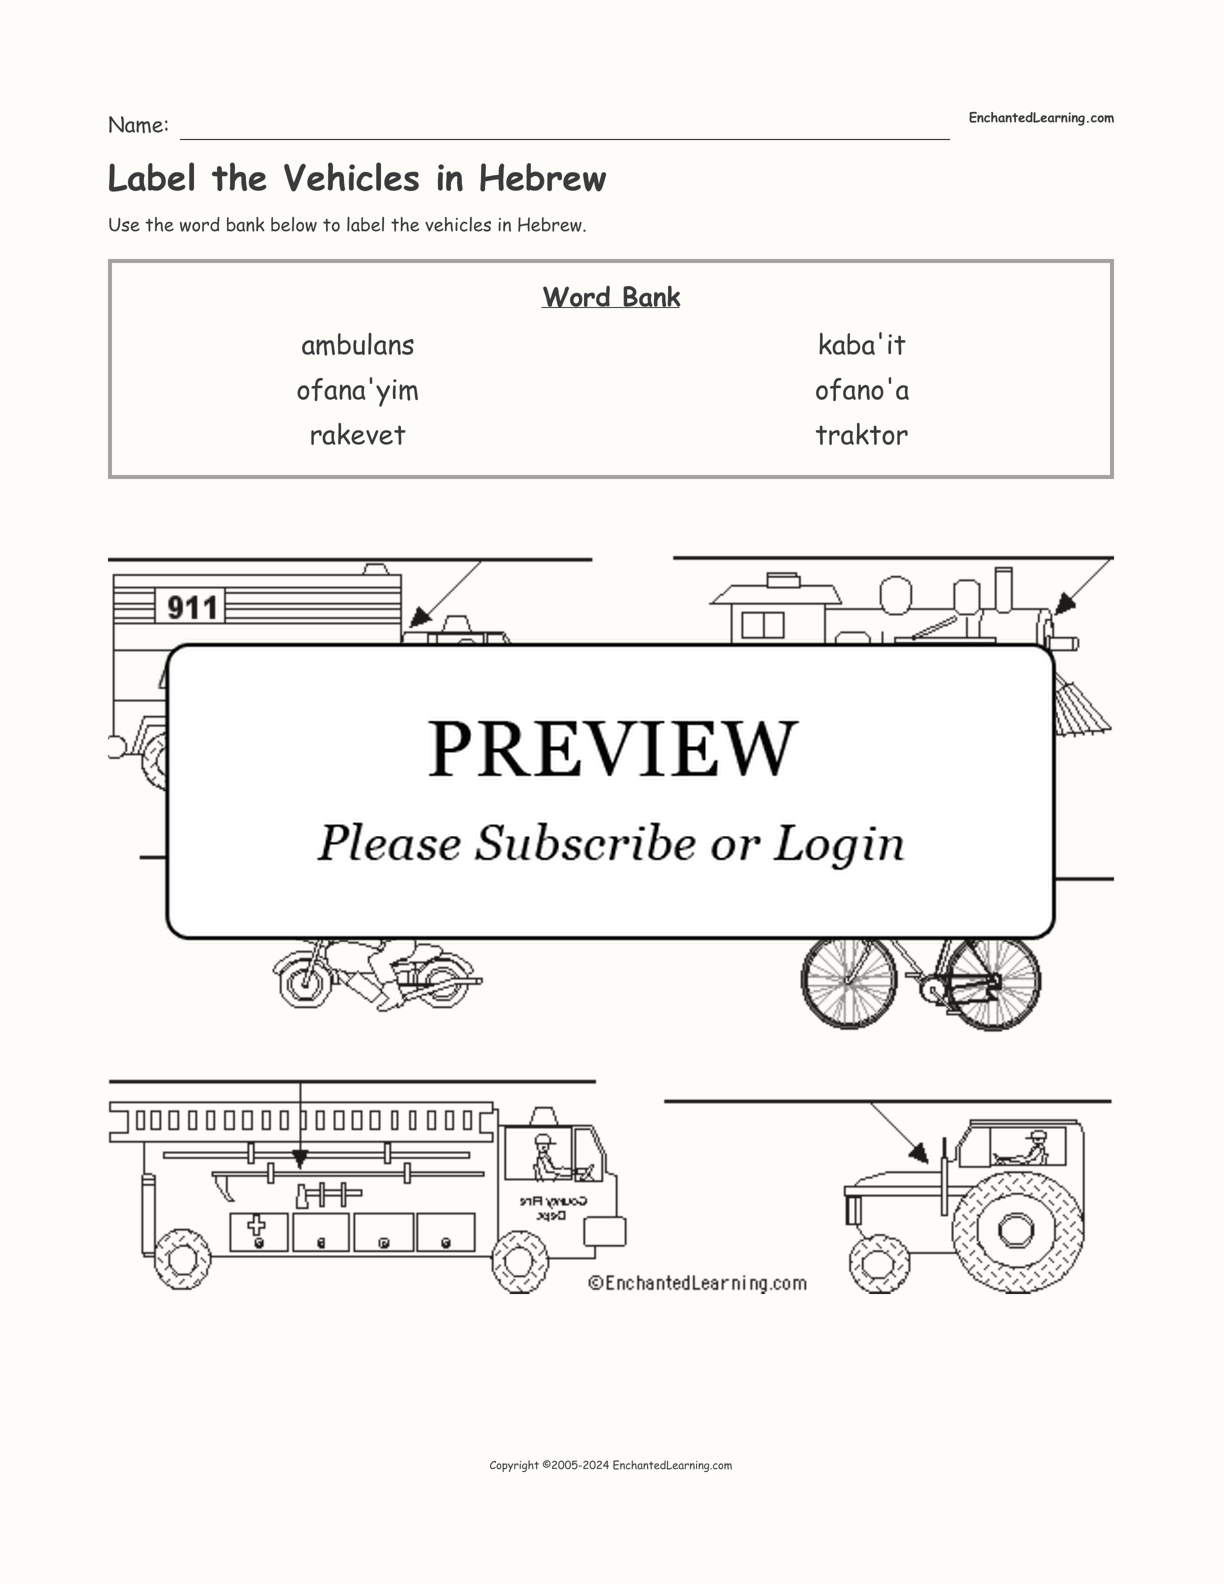 Label the Vehicles in Hebrew interactive worksheet page 1